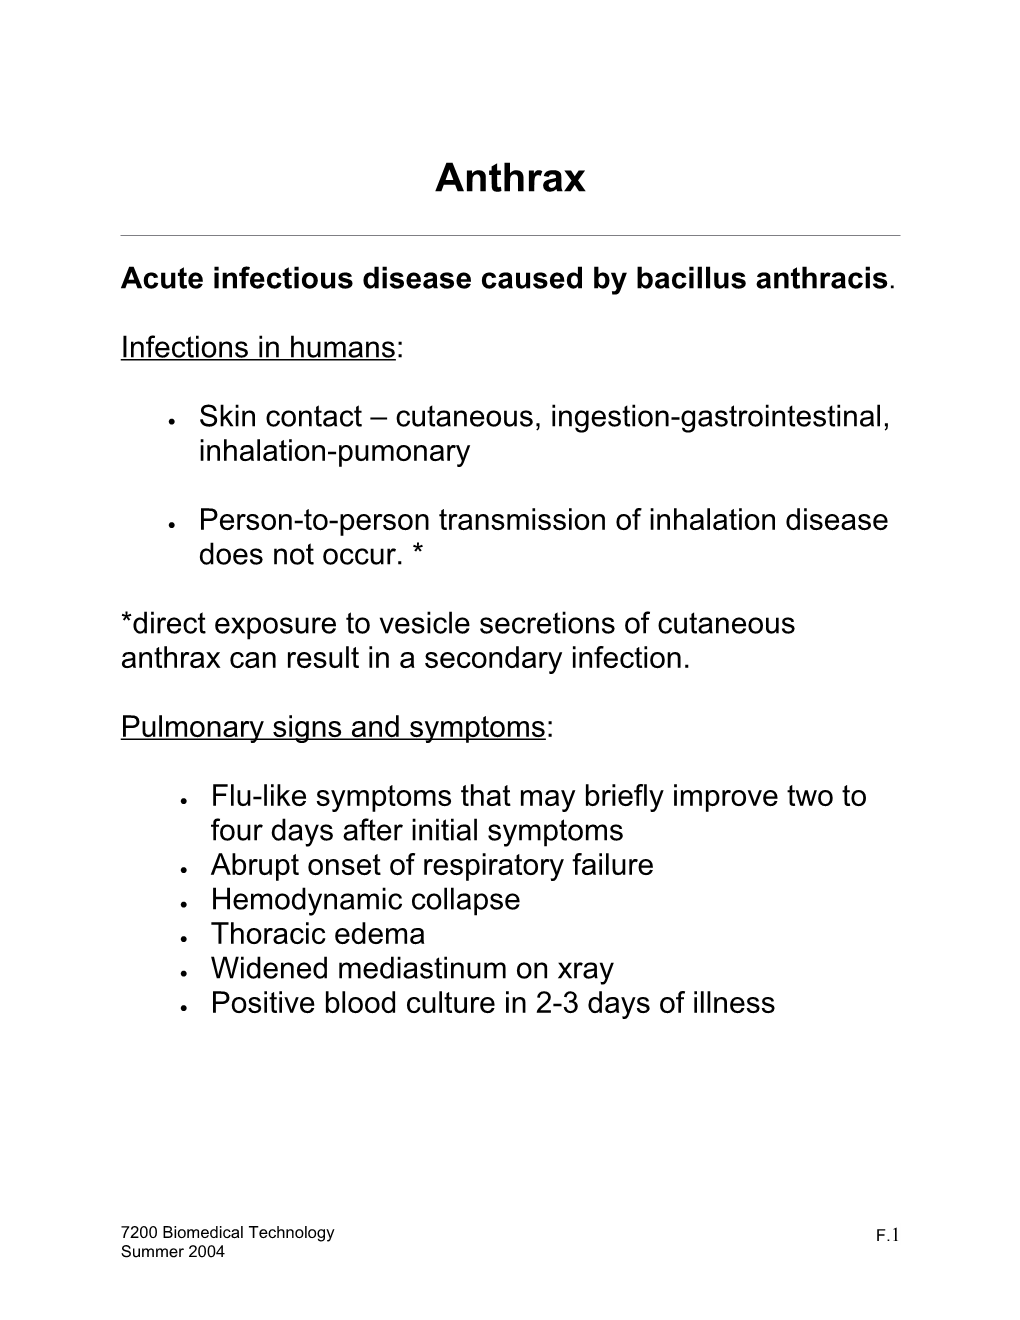 Acute Infectious Disease Caused by Bacillus Anthracis